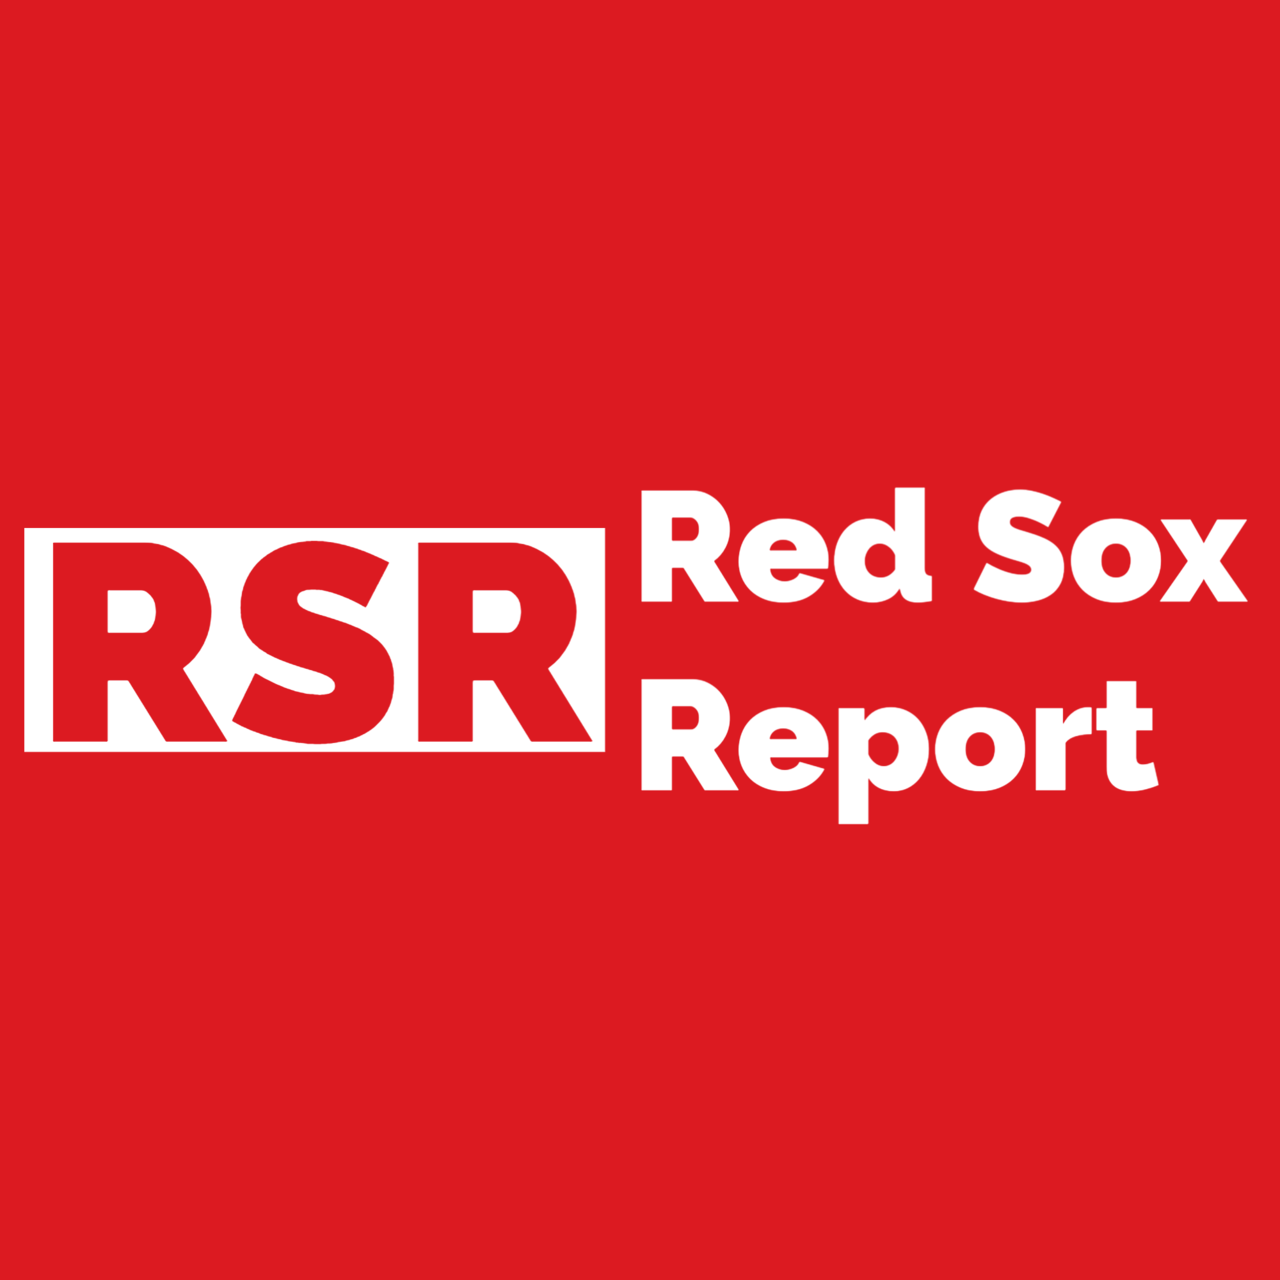 Red Sox Report